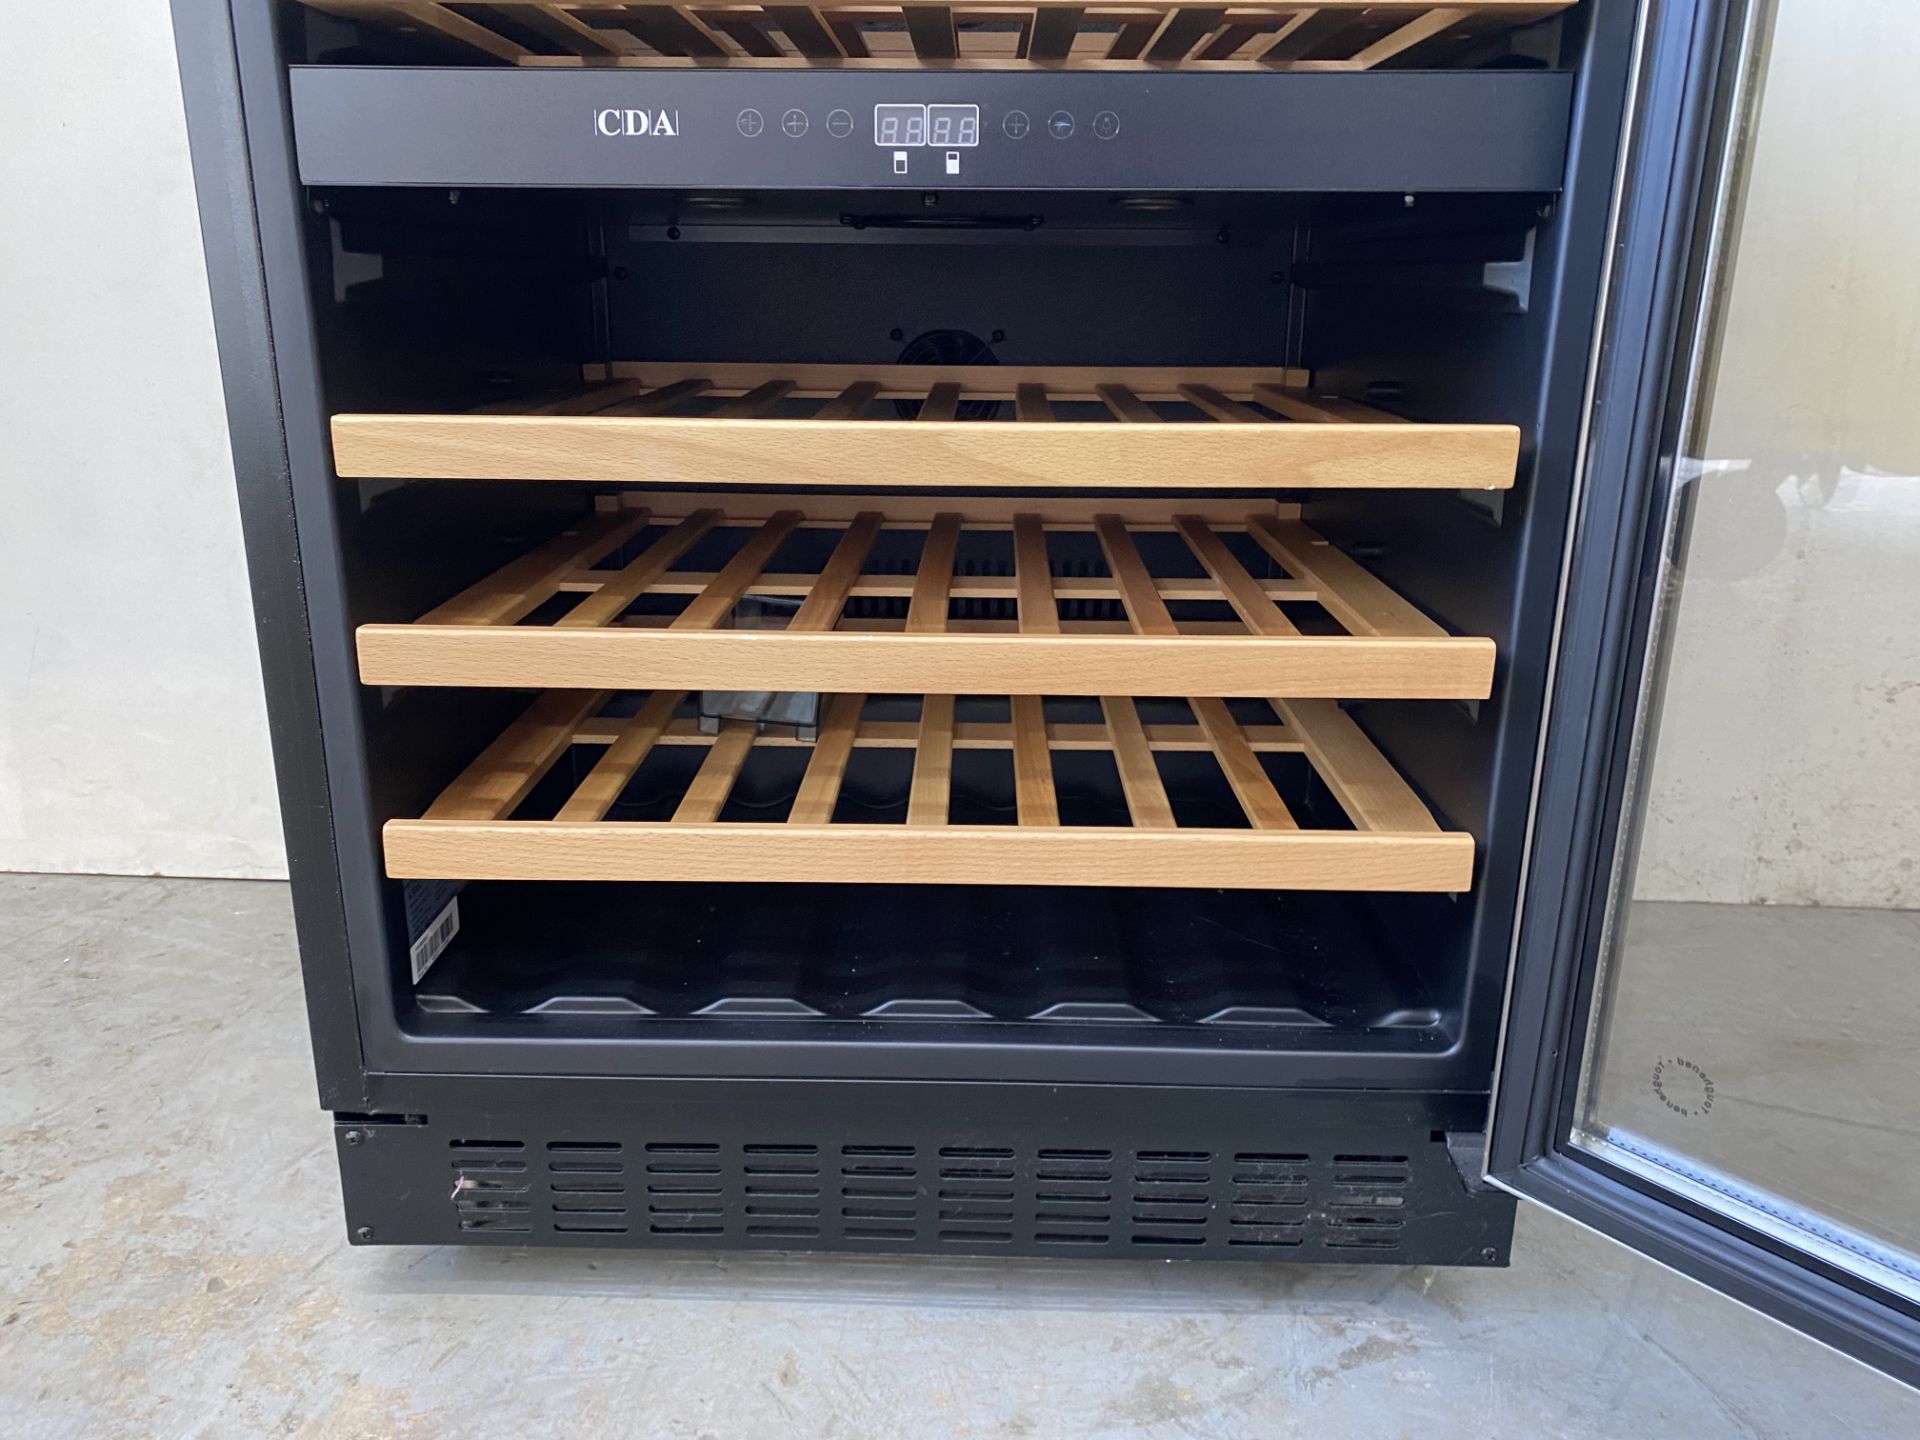 CDA FWC603SS Freestanding Under Counter Wine Cooler - Image 6 of 10